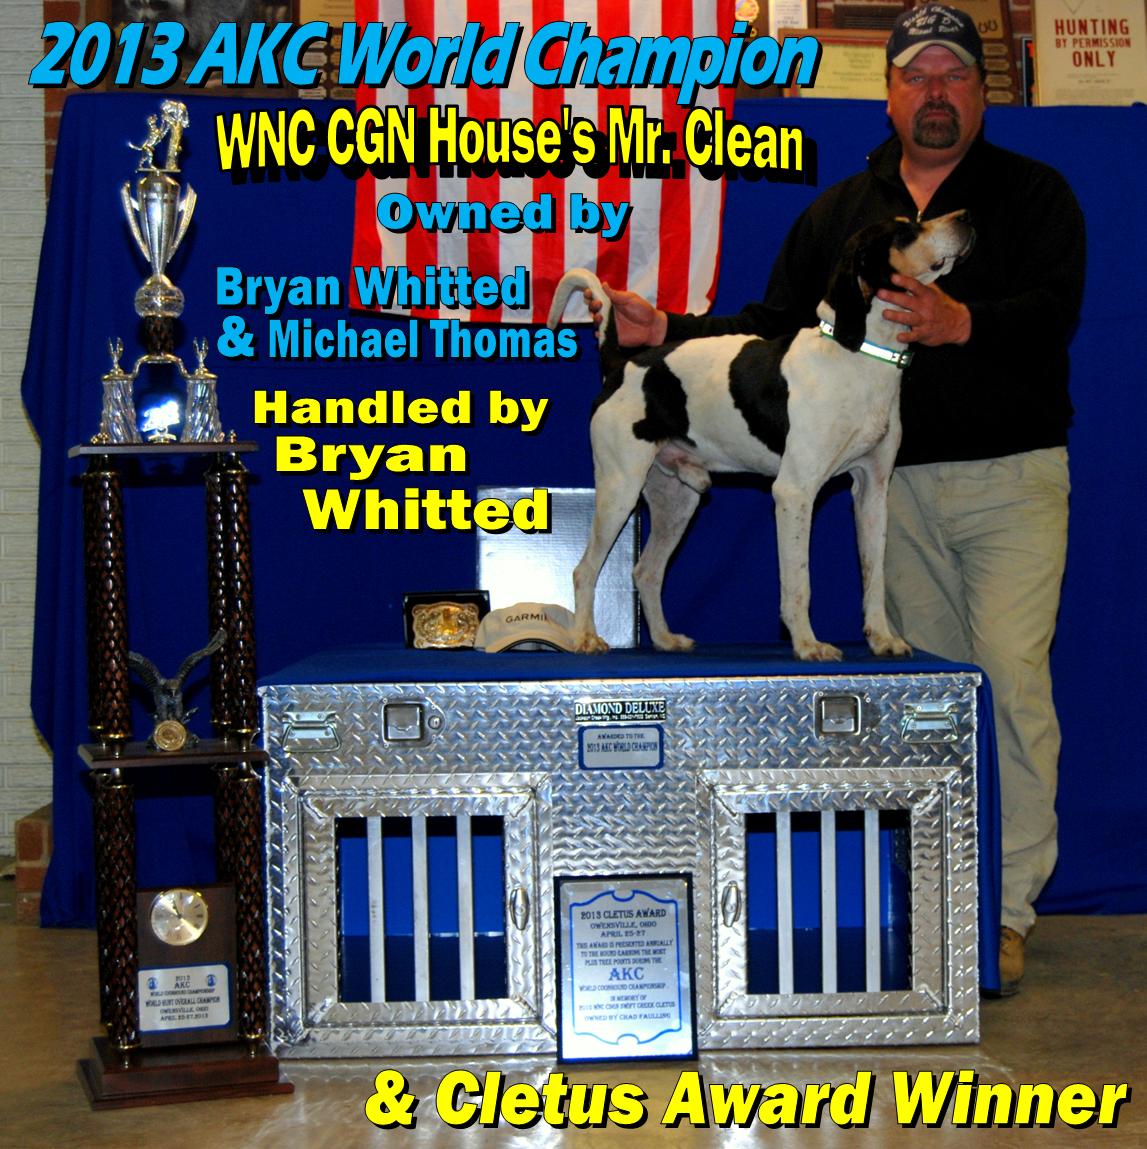 Congrats to UKC World Champ Mr Clean